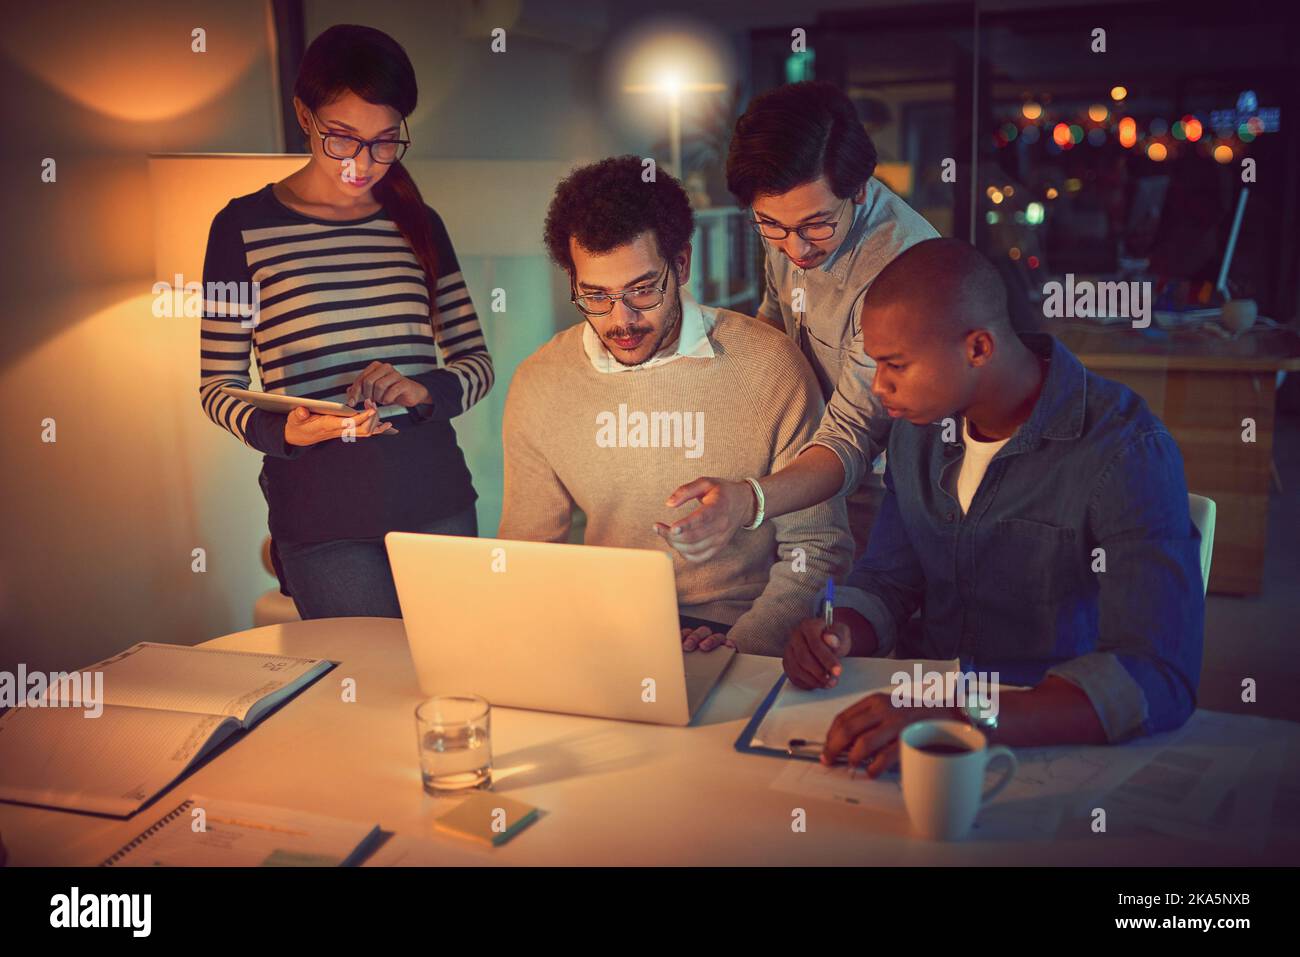 Theyve got the determination to beat their deadlines. a group of designers working late in an office. Stock Photo